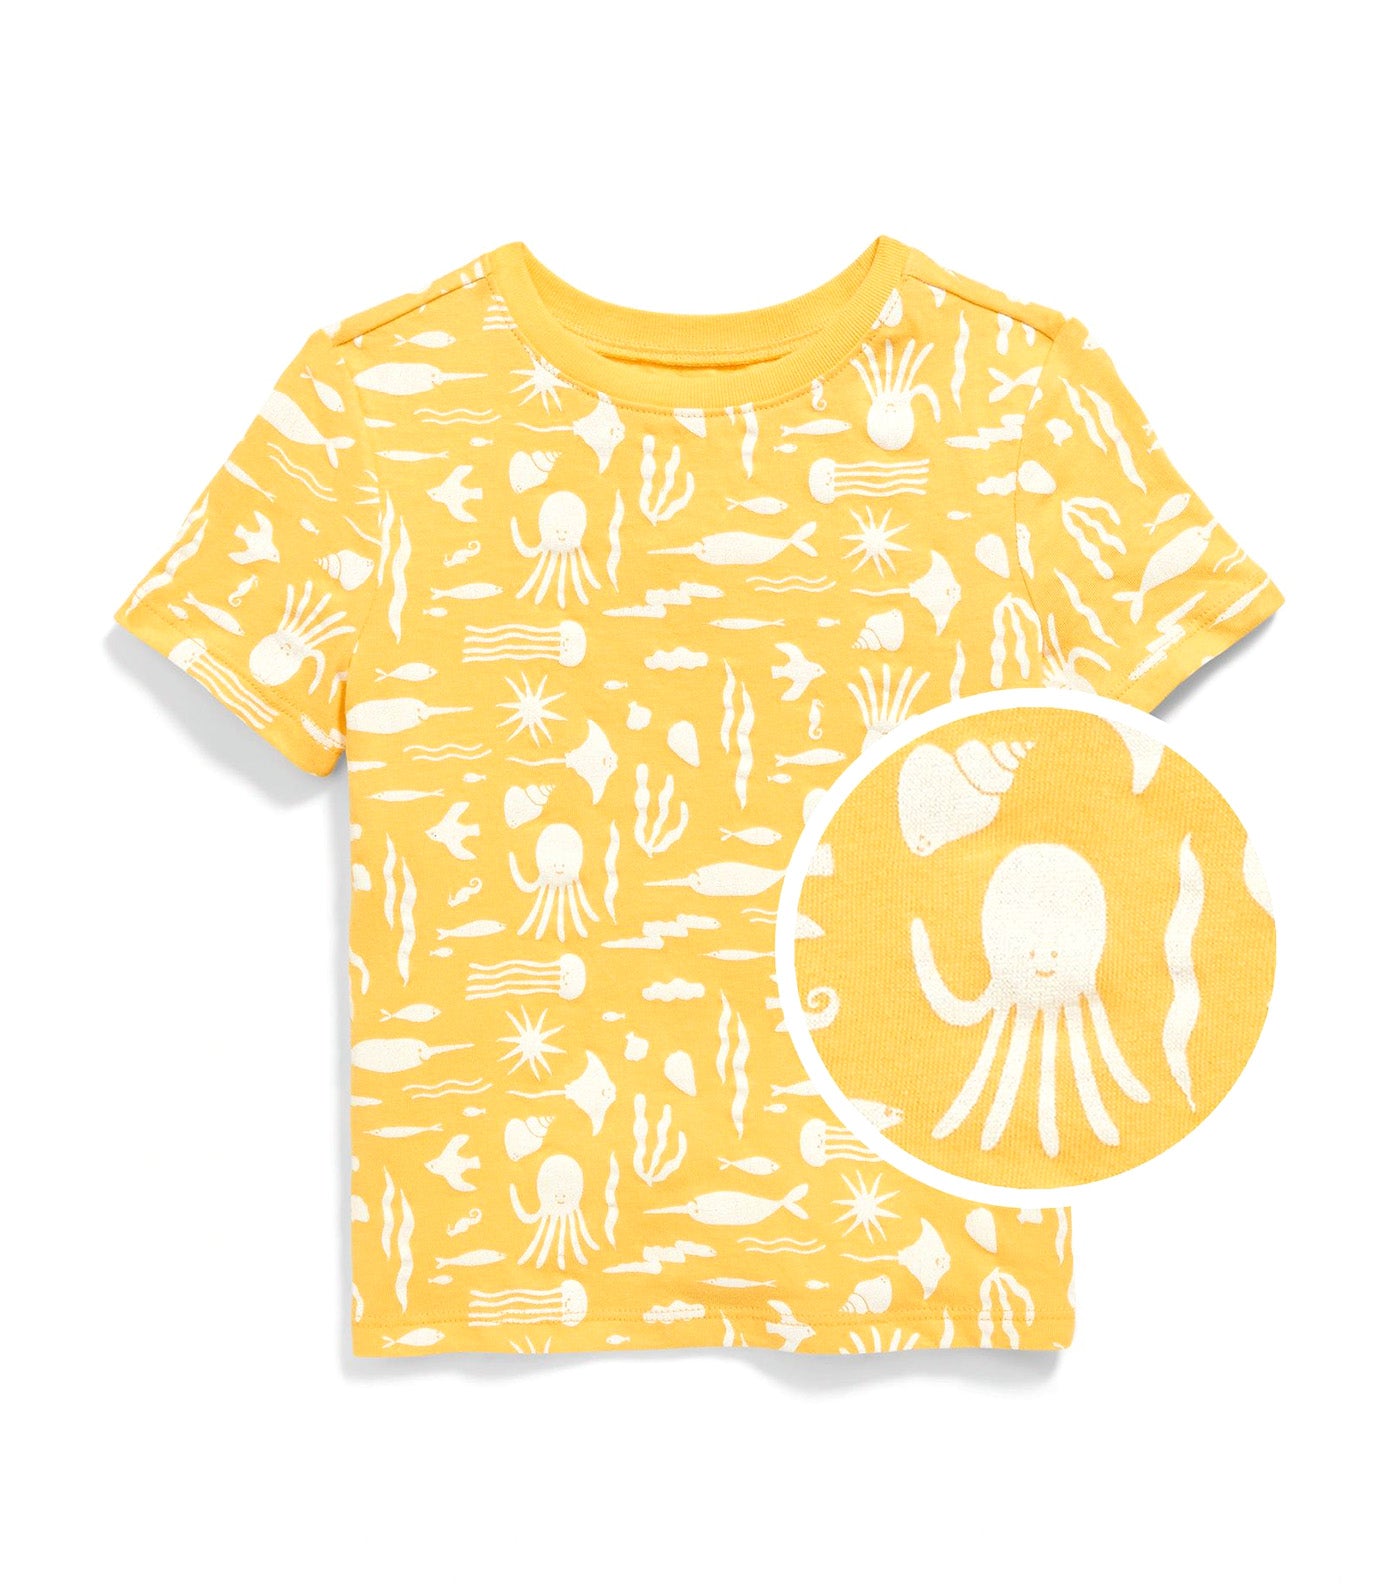 Unisex Printed Short-Sleeve T-Shirt for Toddler Yellow Fish